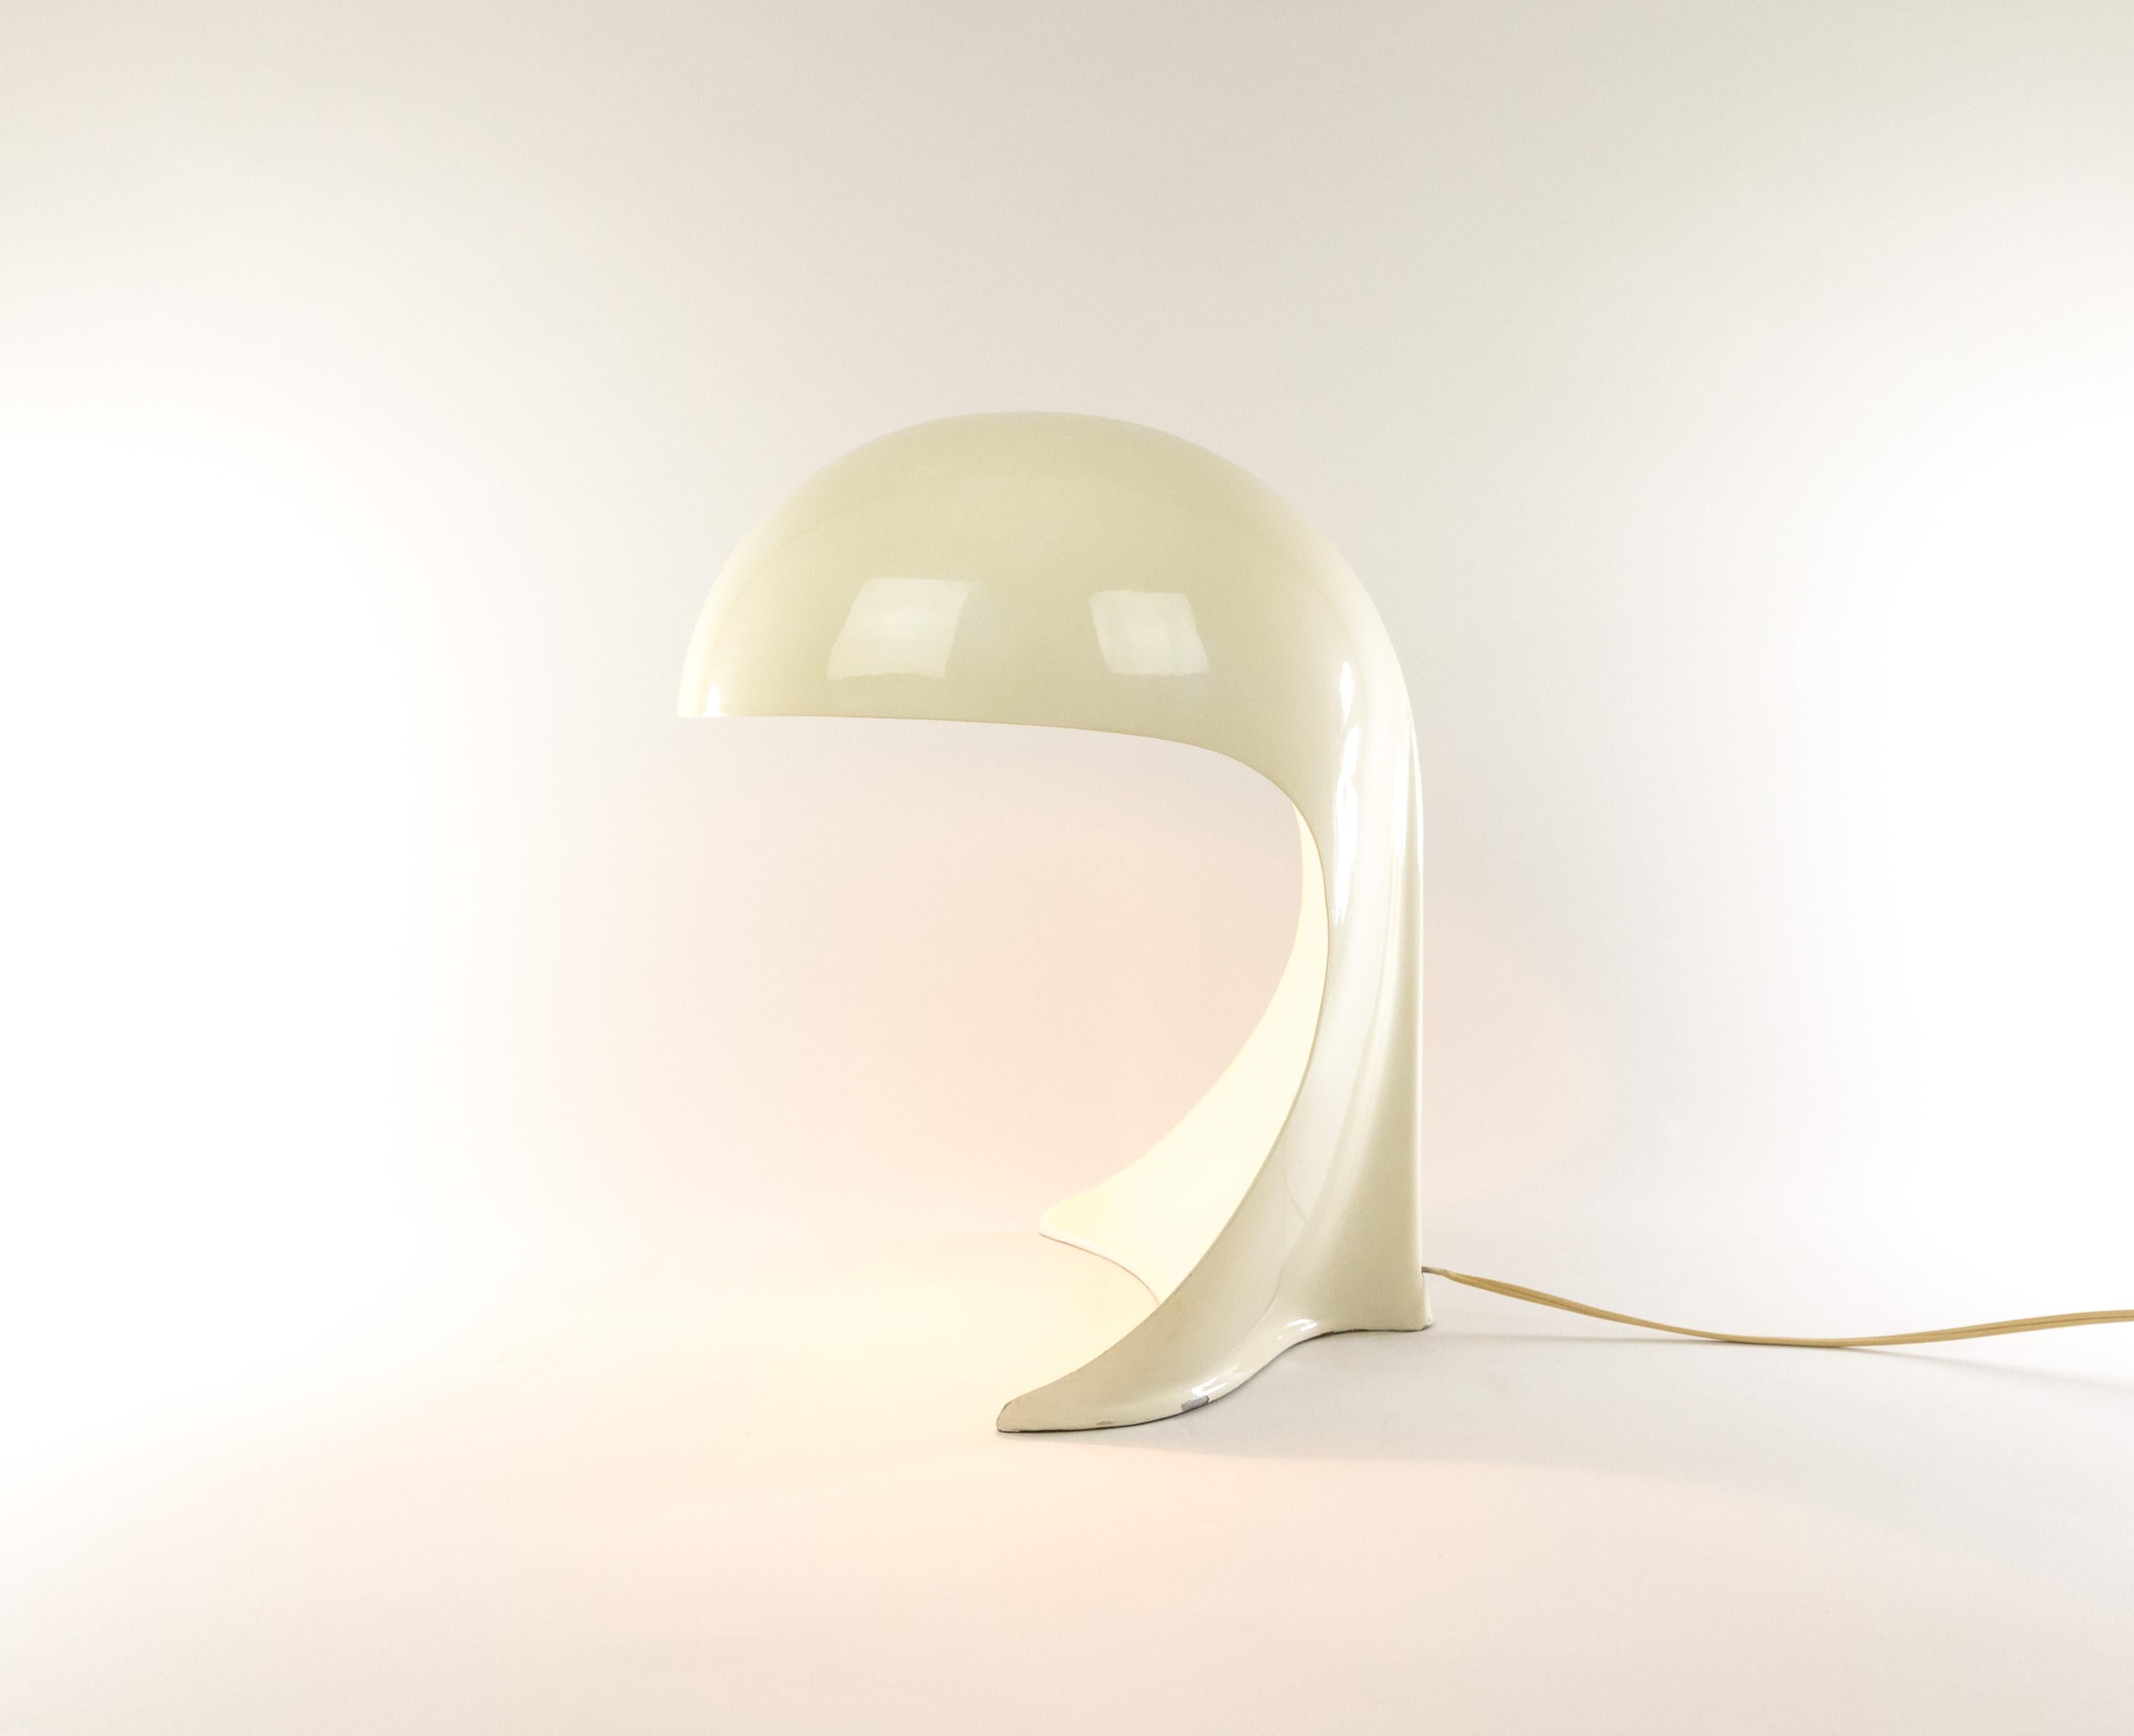 The Dania table lamp was designed by Dario Tognon in collaboration with Studio Celli for Artemide. The sculptural and organic model was forged in one piece cast aluminium painted white. 

After the introduction in 1969 Artemide produced the lamp